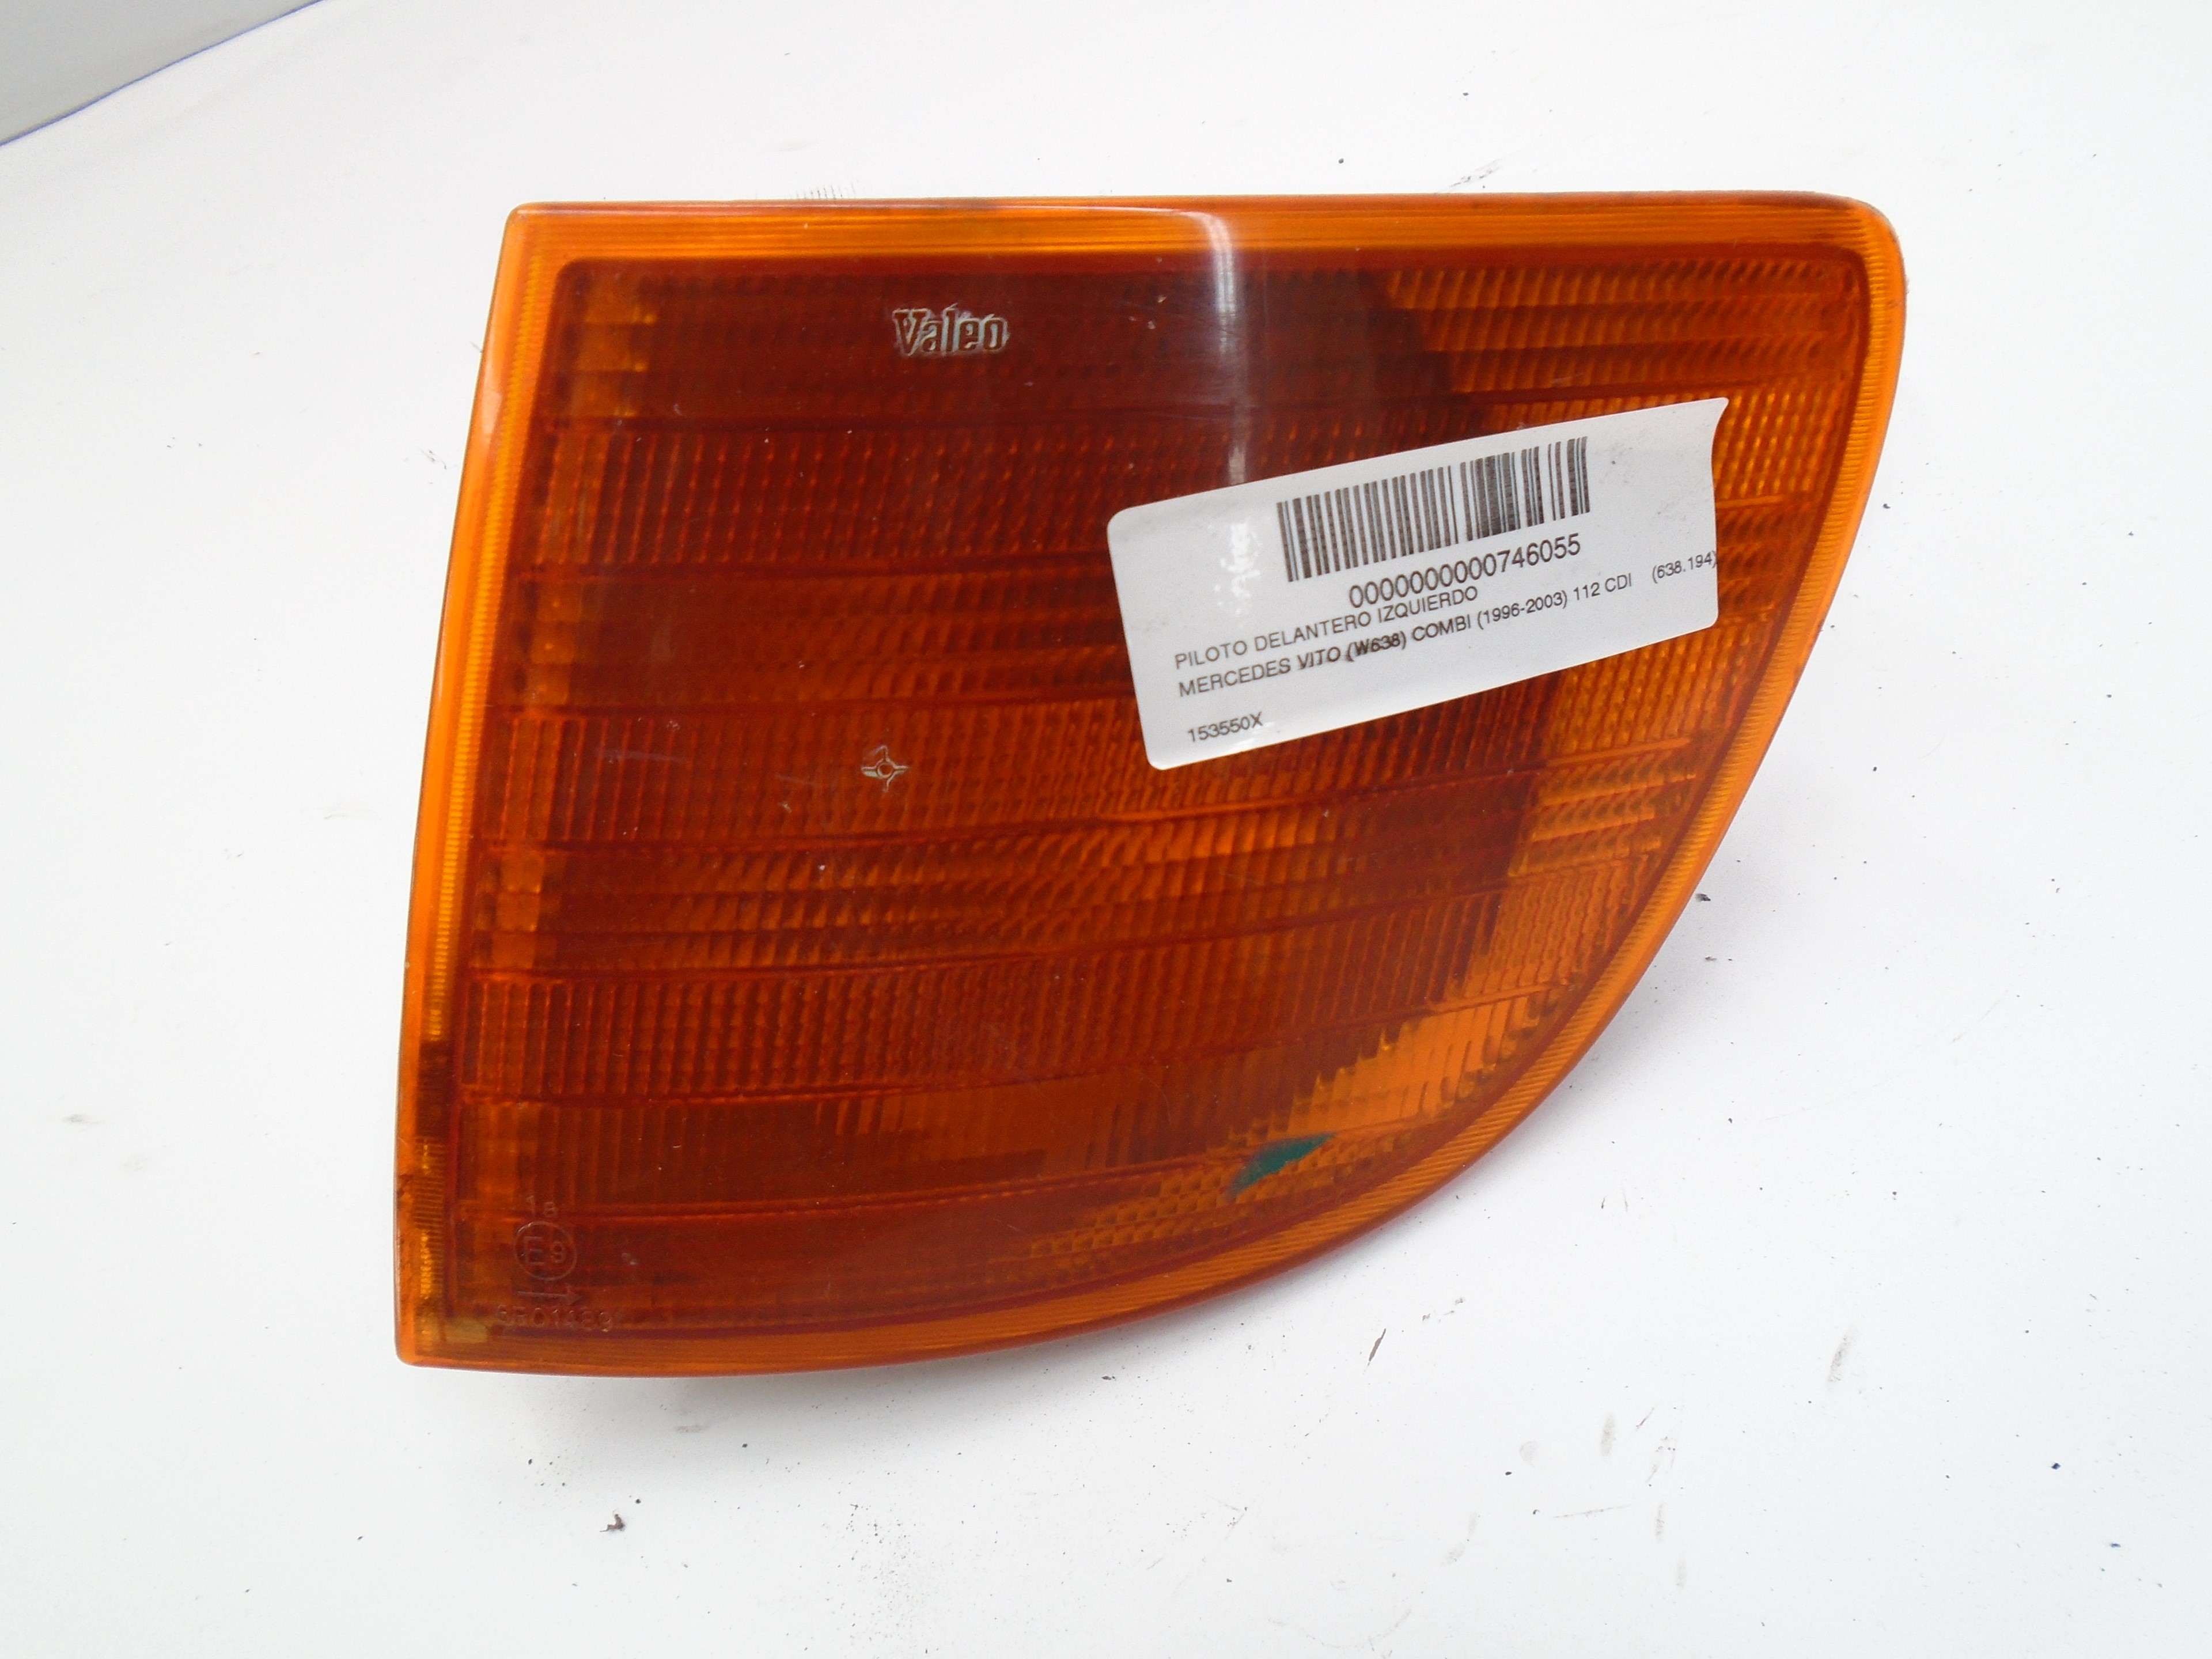 MERCEDES-BENZ Vito W638 (1996-2003) Front left turn light A6388200021 25200703